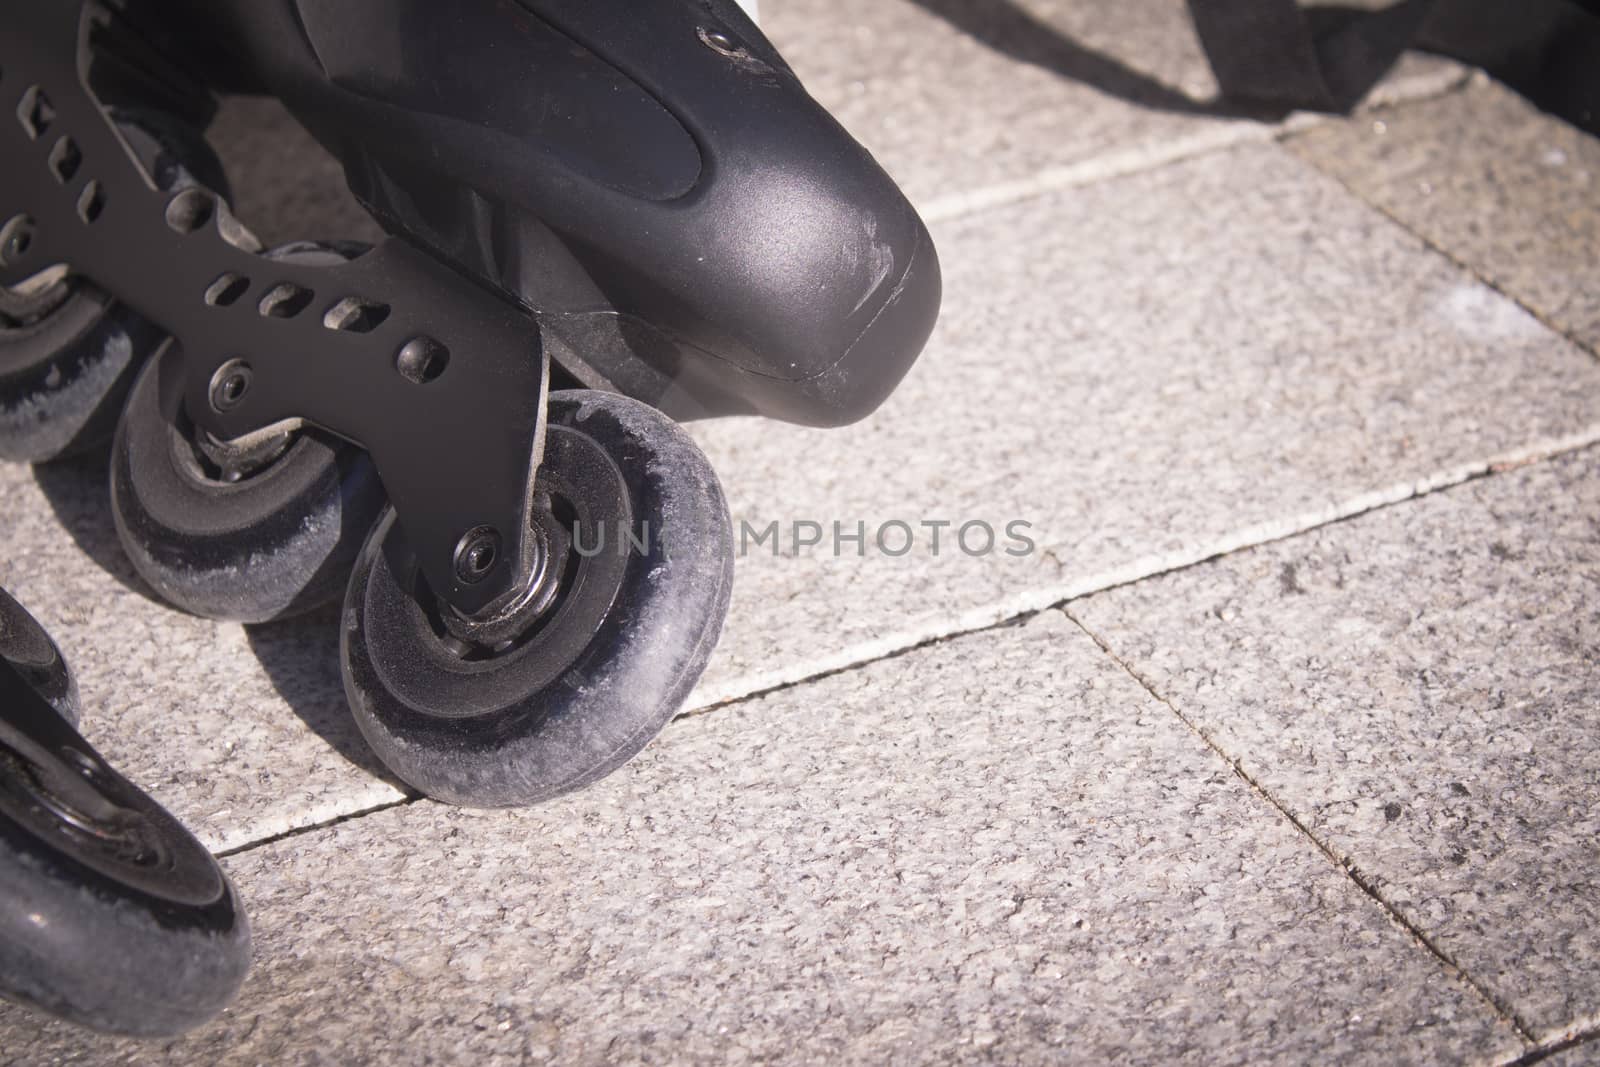 Freestyle roller skates by GemaIbarra